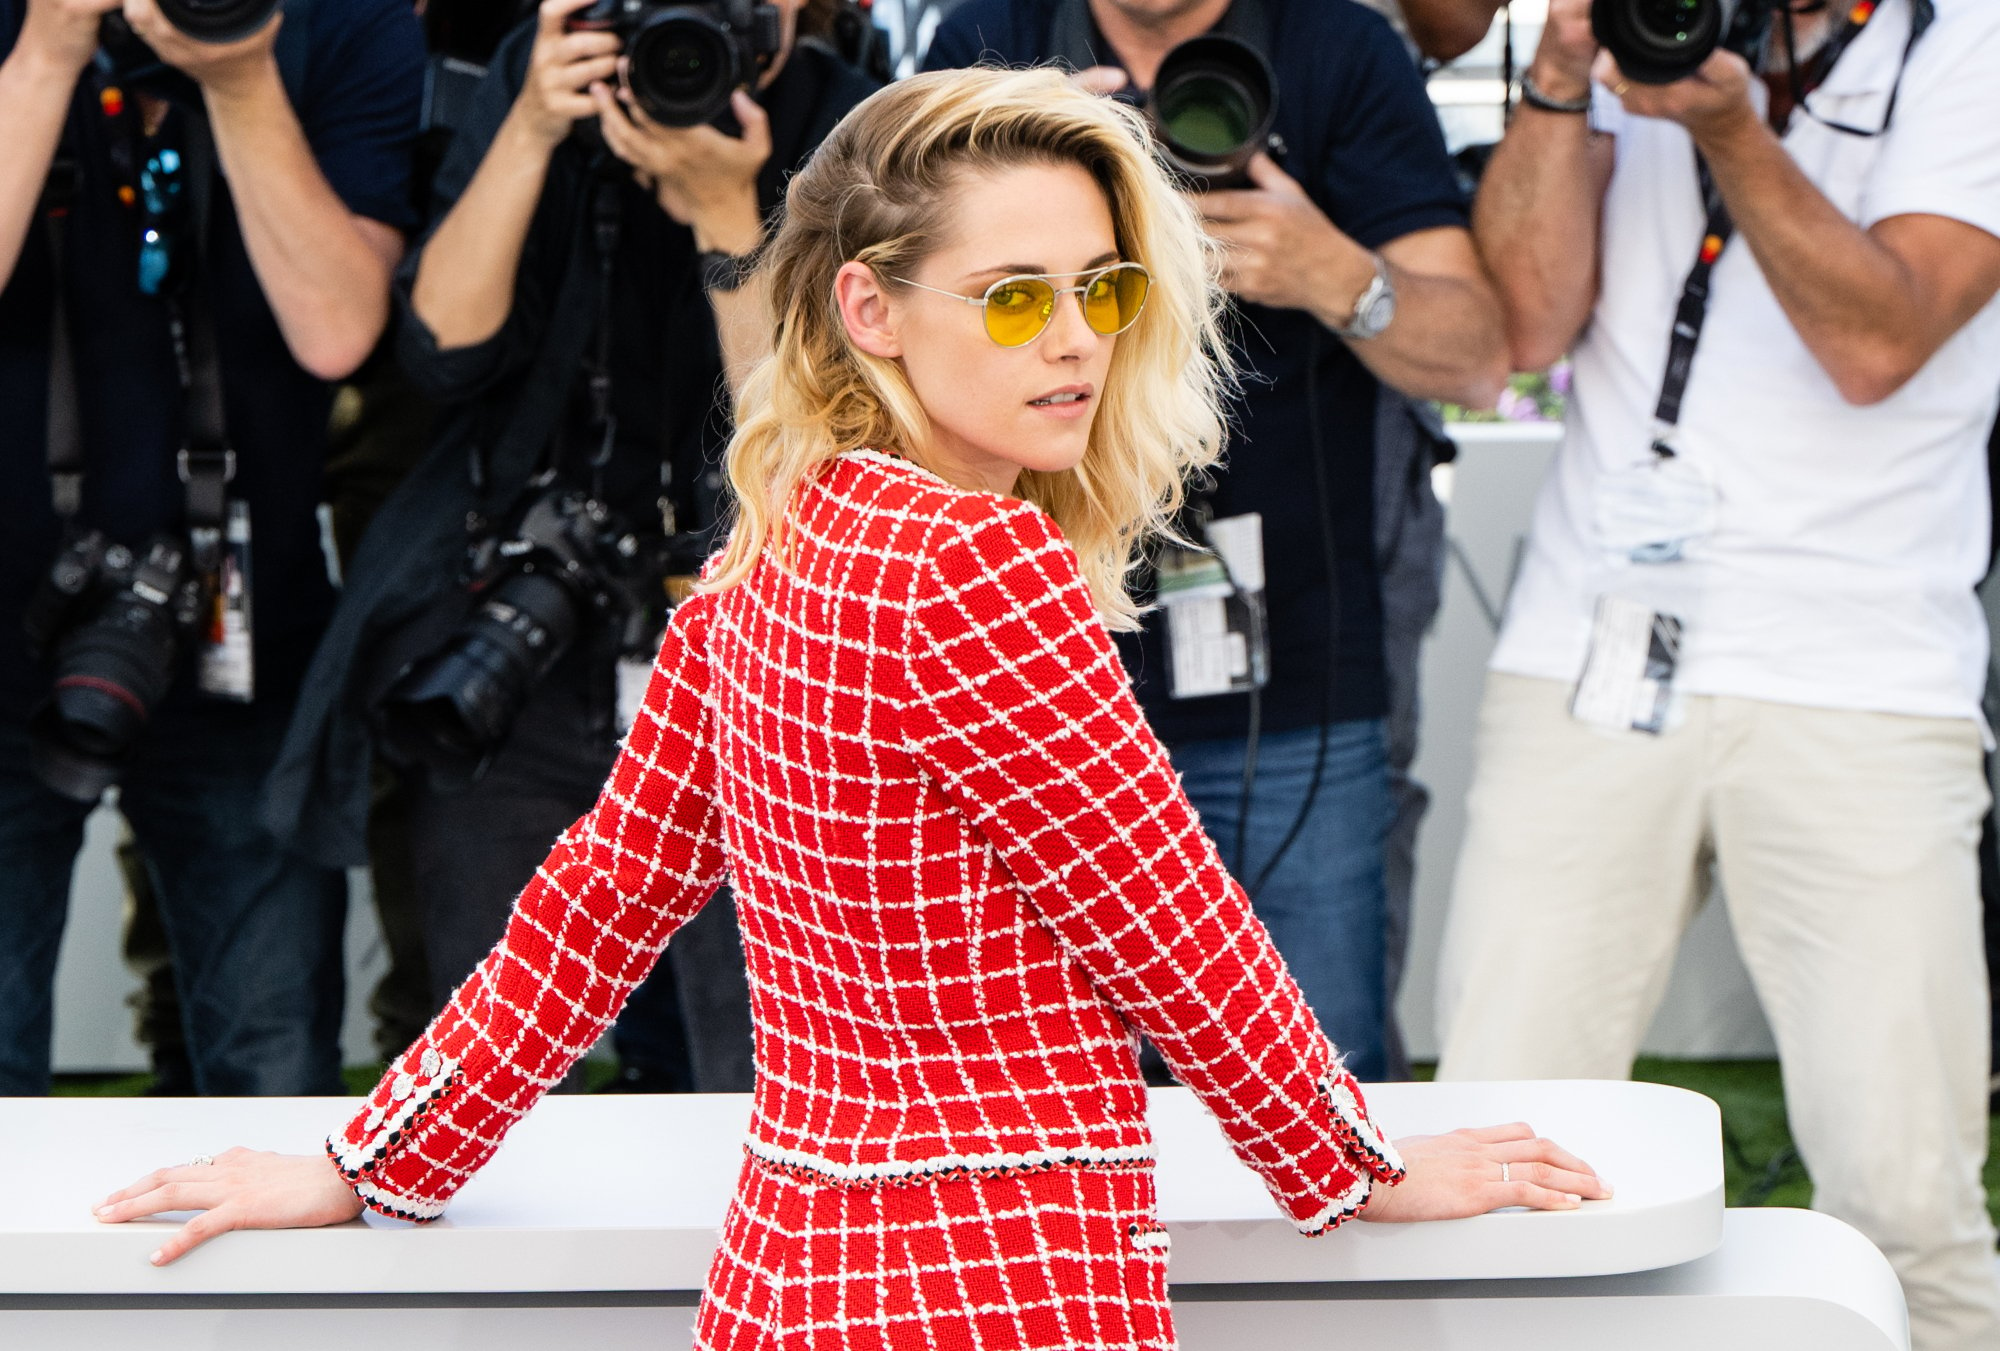 'Crimes of the Future' actor Kristen Stewart wearing a red and white outfit with yellow sunglasses. She has her hands on a white table, looking over her shoulder at the camera.